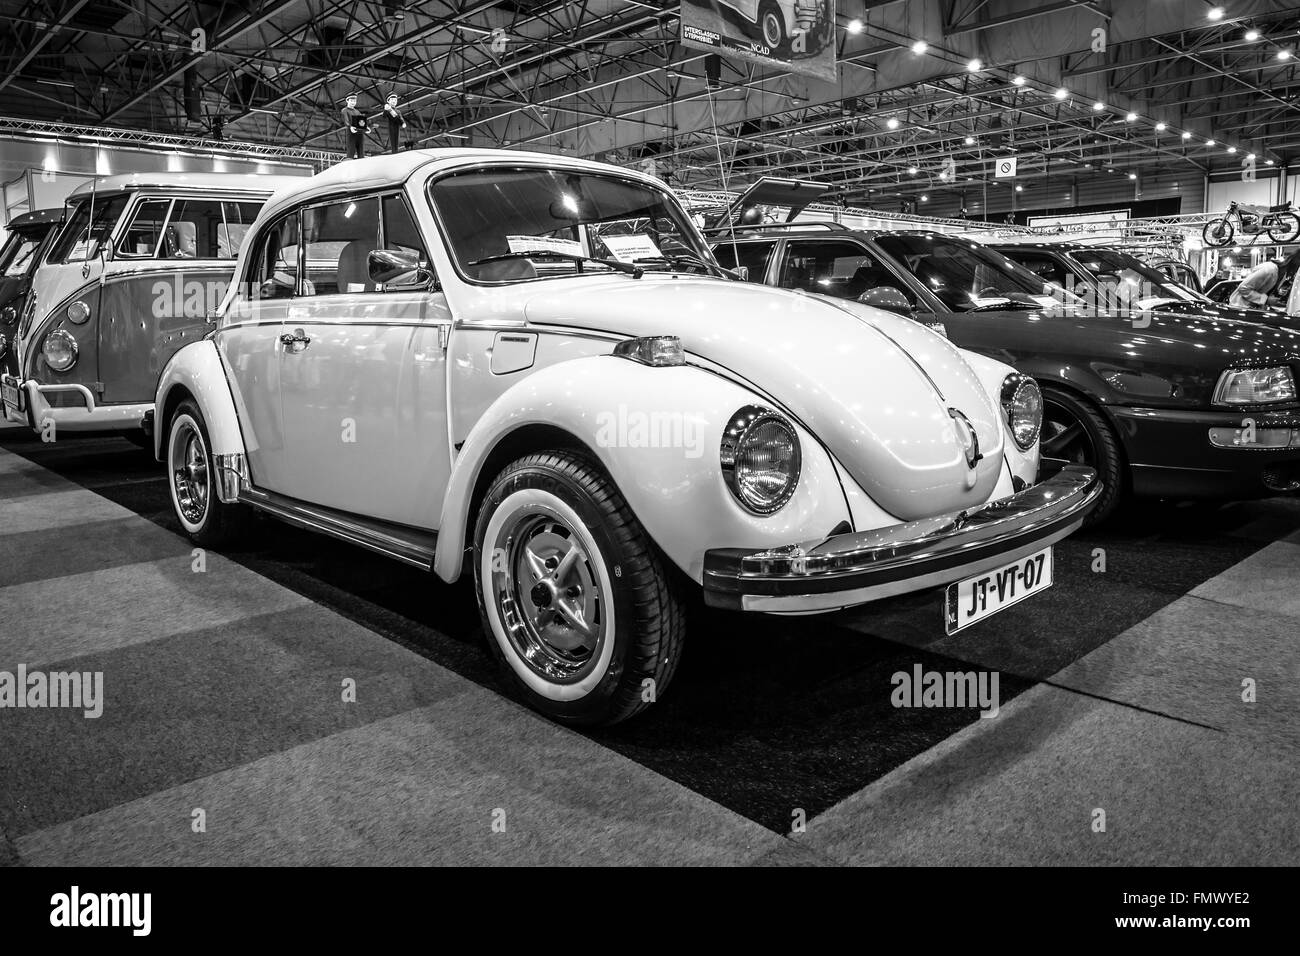 Subcompact Volkswagen Beetle. Black and white. Stock Photo